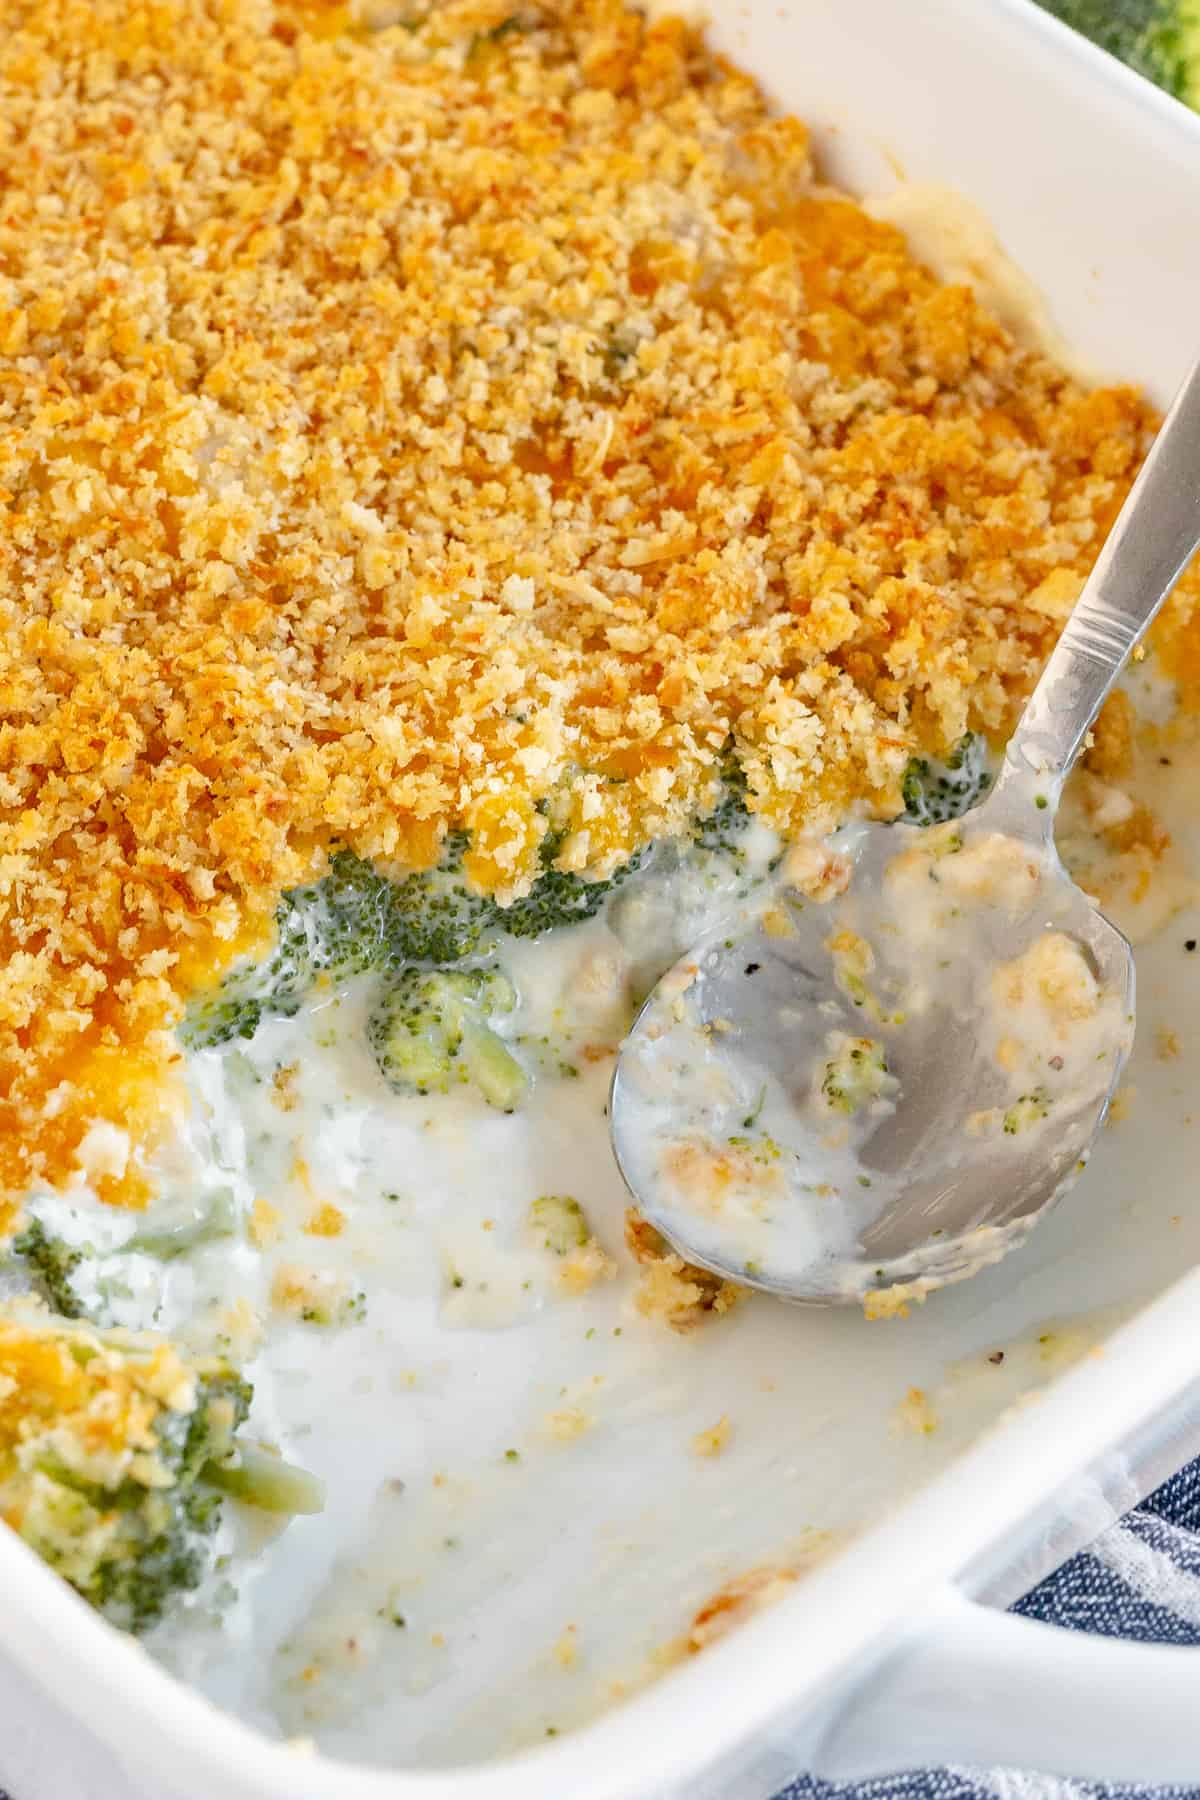 A close up of a spoon resting in a dish full of Broccoli Pearl Onion Casserole.